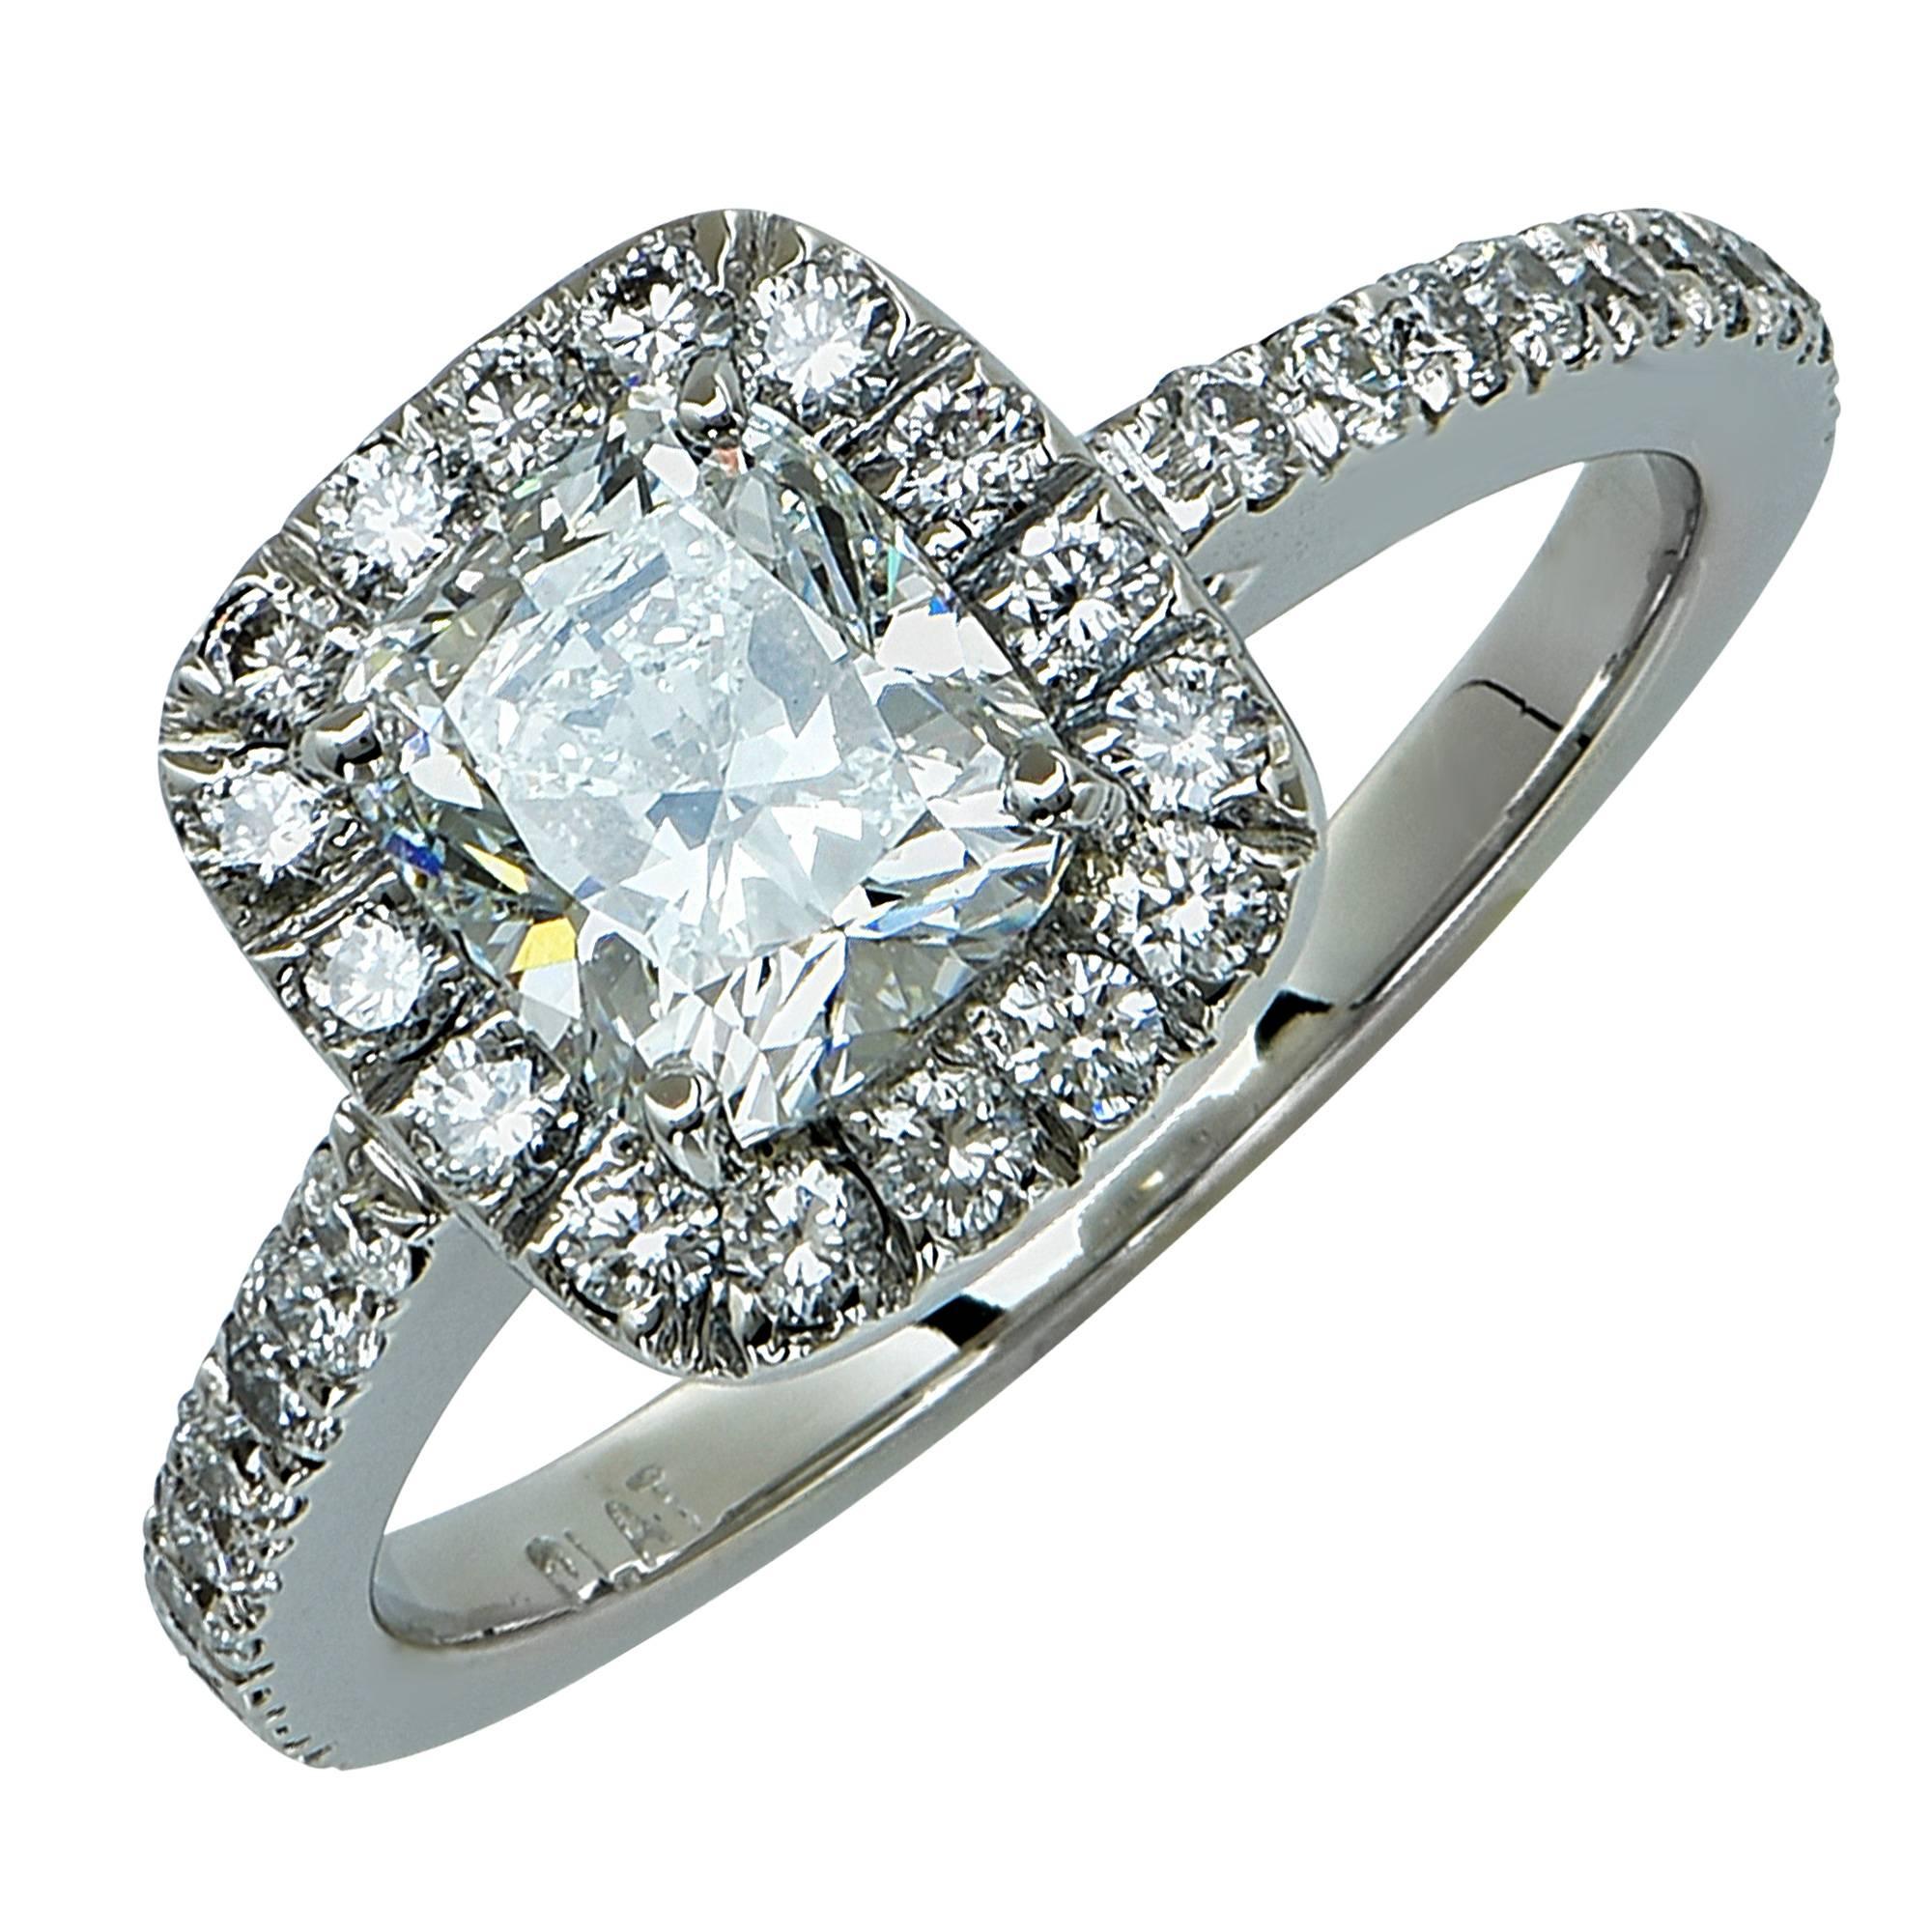 Platinum custom-made ring featuring a 1.29ct F color VS2 clarity GIA cushion cut diamond accented by 34 round brilliant cut diamonds weighing approximately .70cts total F color VS clarity.

The ring is a size 6.5 and can be sized up or down. It